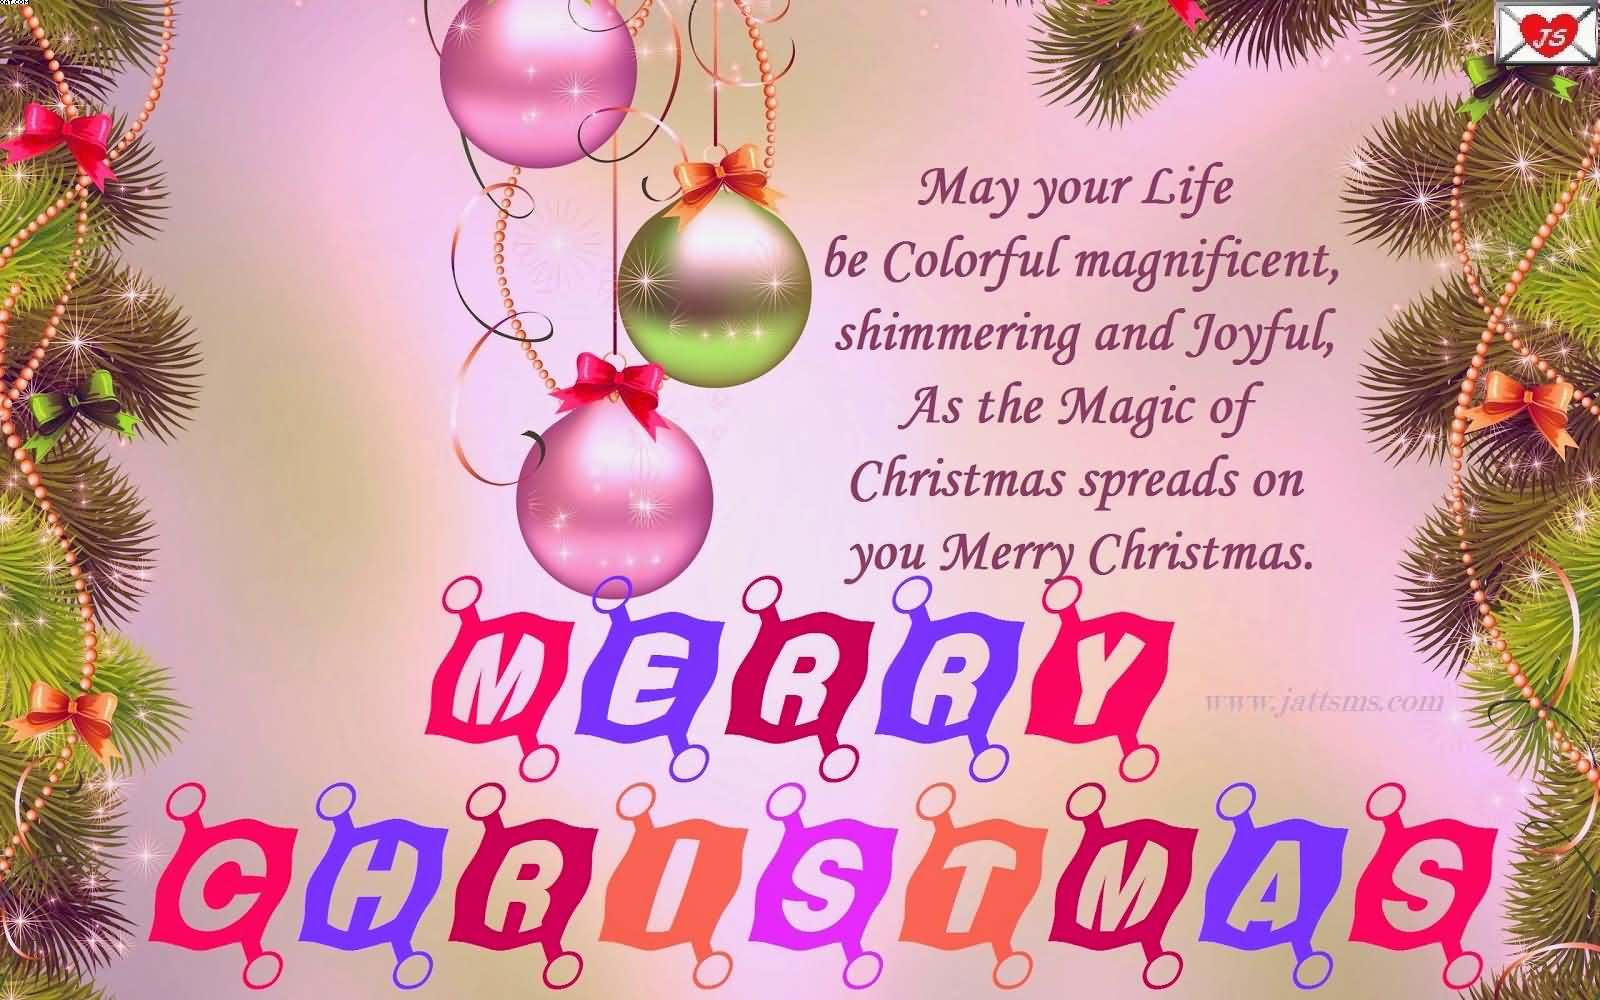 As the magic of Christmas spreads on you Merry Christmas